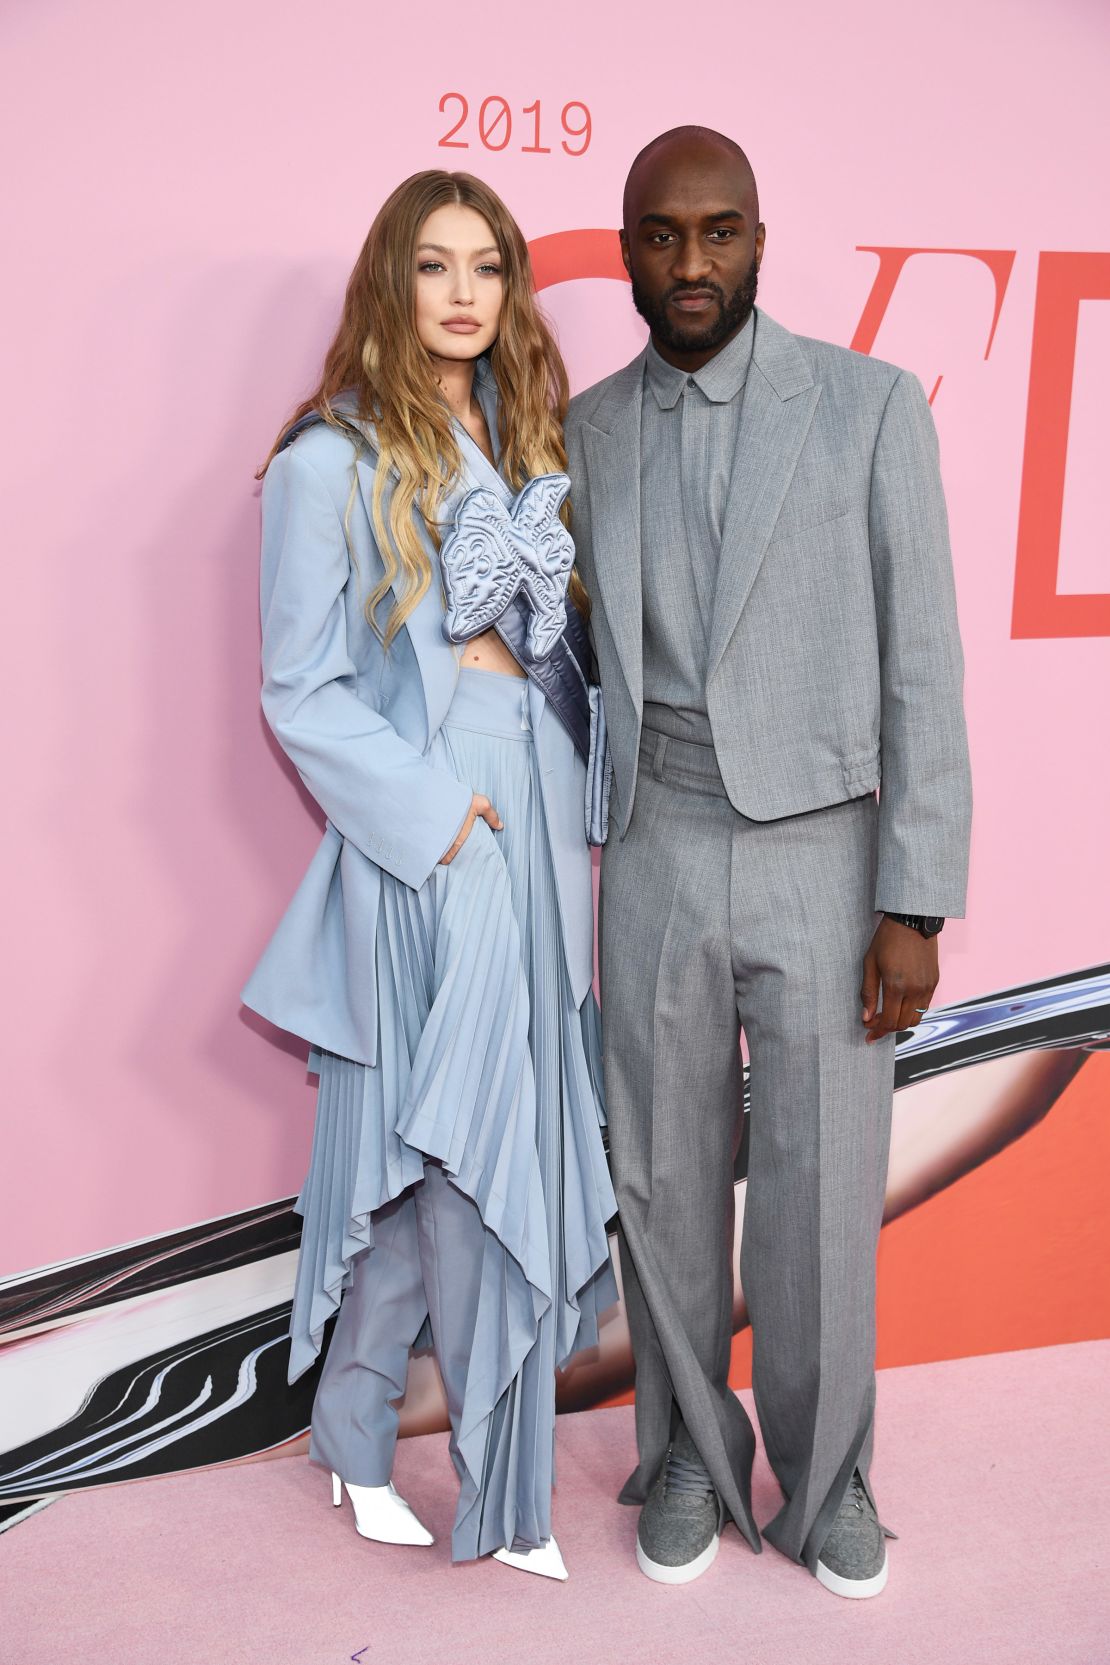 Gigi Hadid and Virgil Abloh on the red carpet at the CFDA Fashion Awards.